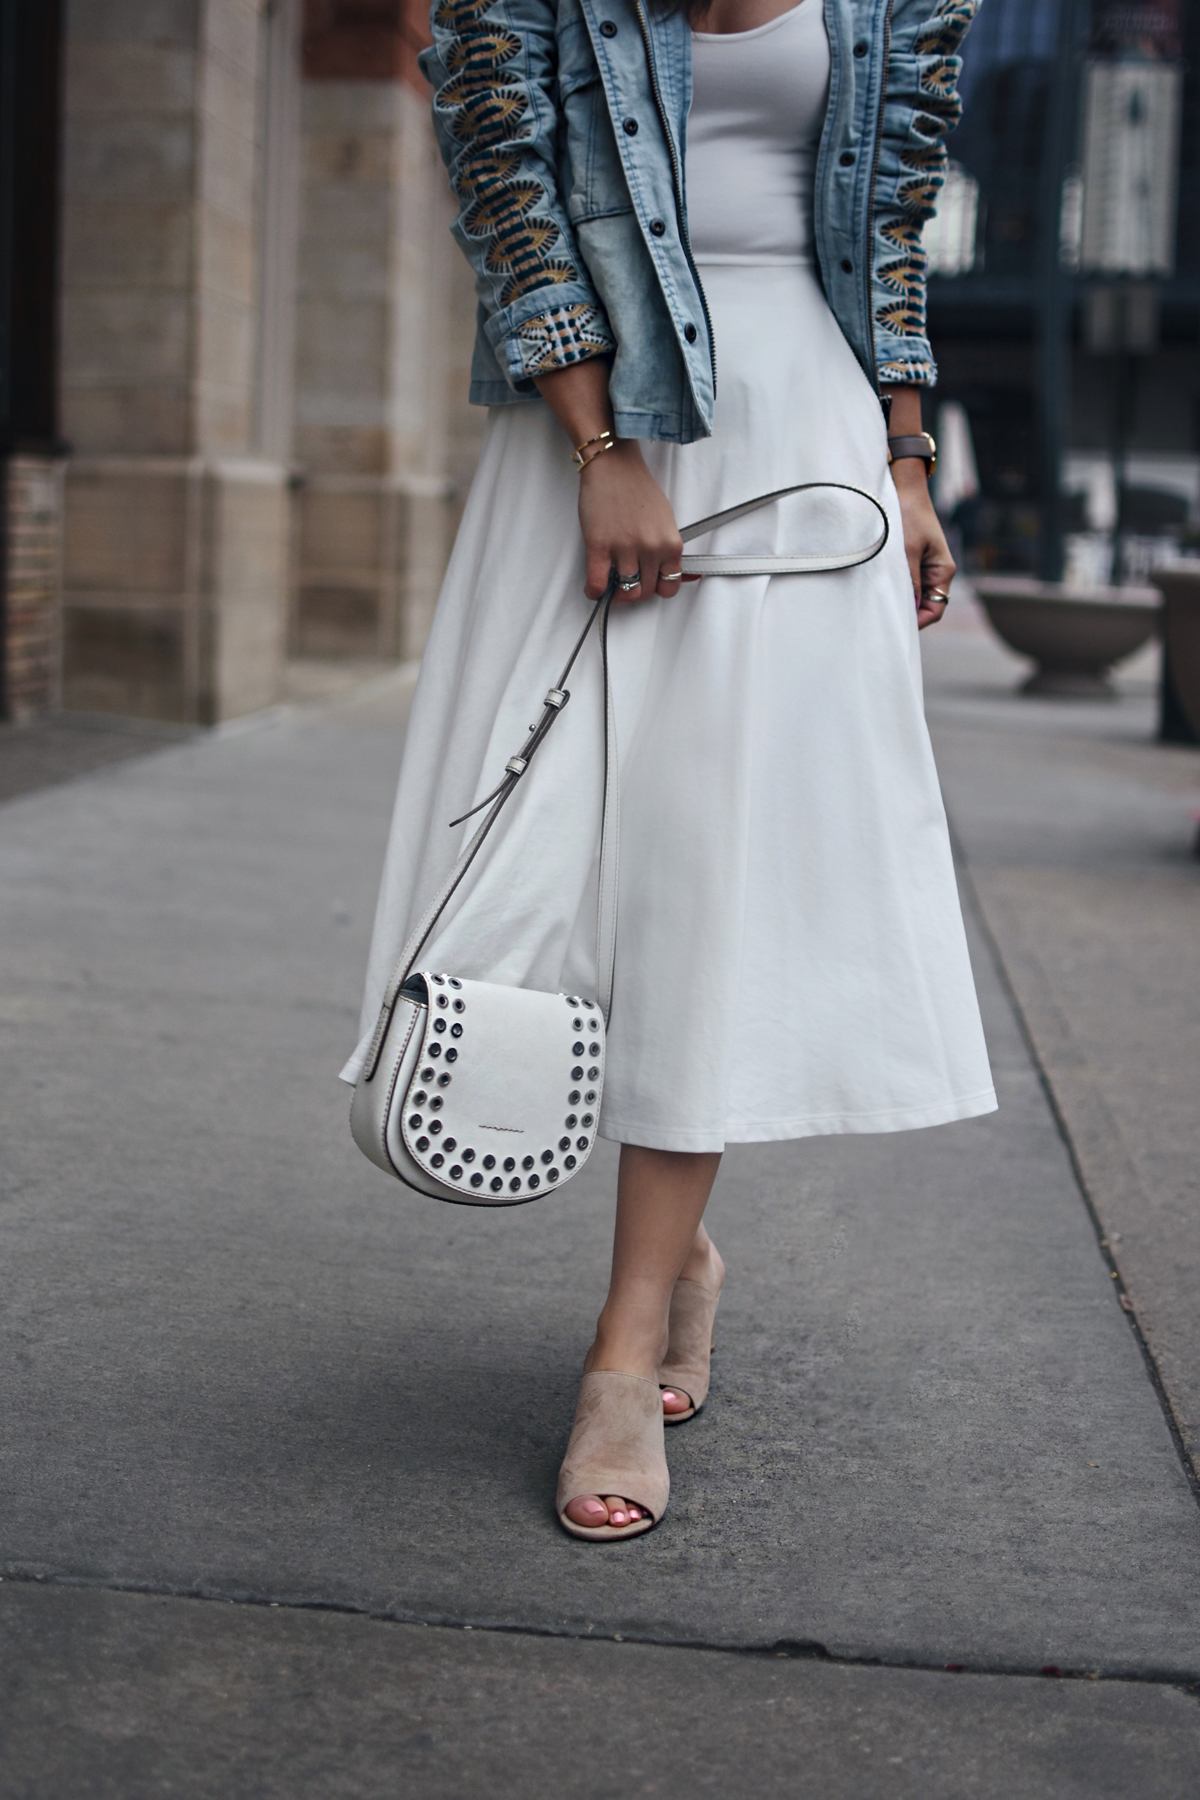 Carolina Hellal of Chic Talk wearing a Free People denim embroidered jacket, The Frye Company white crossbody bag, Donald J Pliner Ellis sandals, and Leith white A line dress via Nordstrom